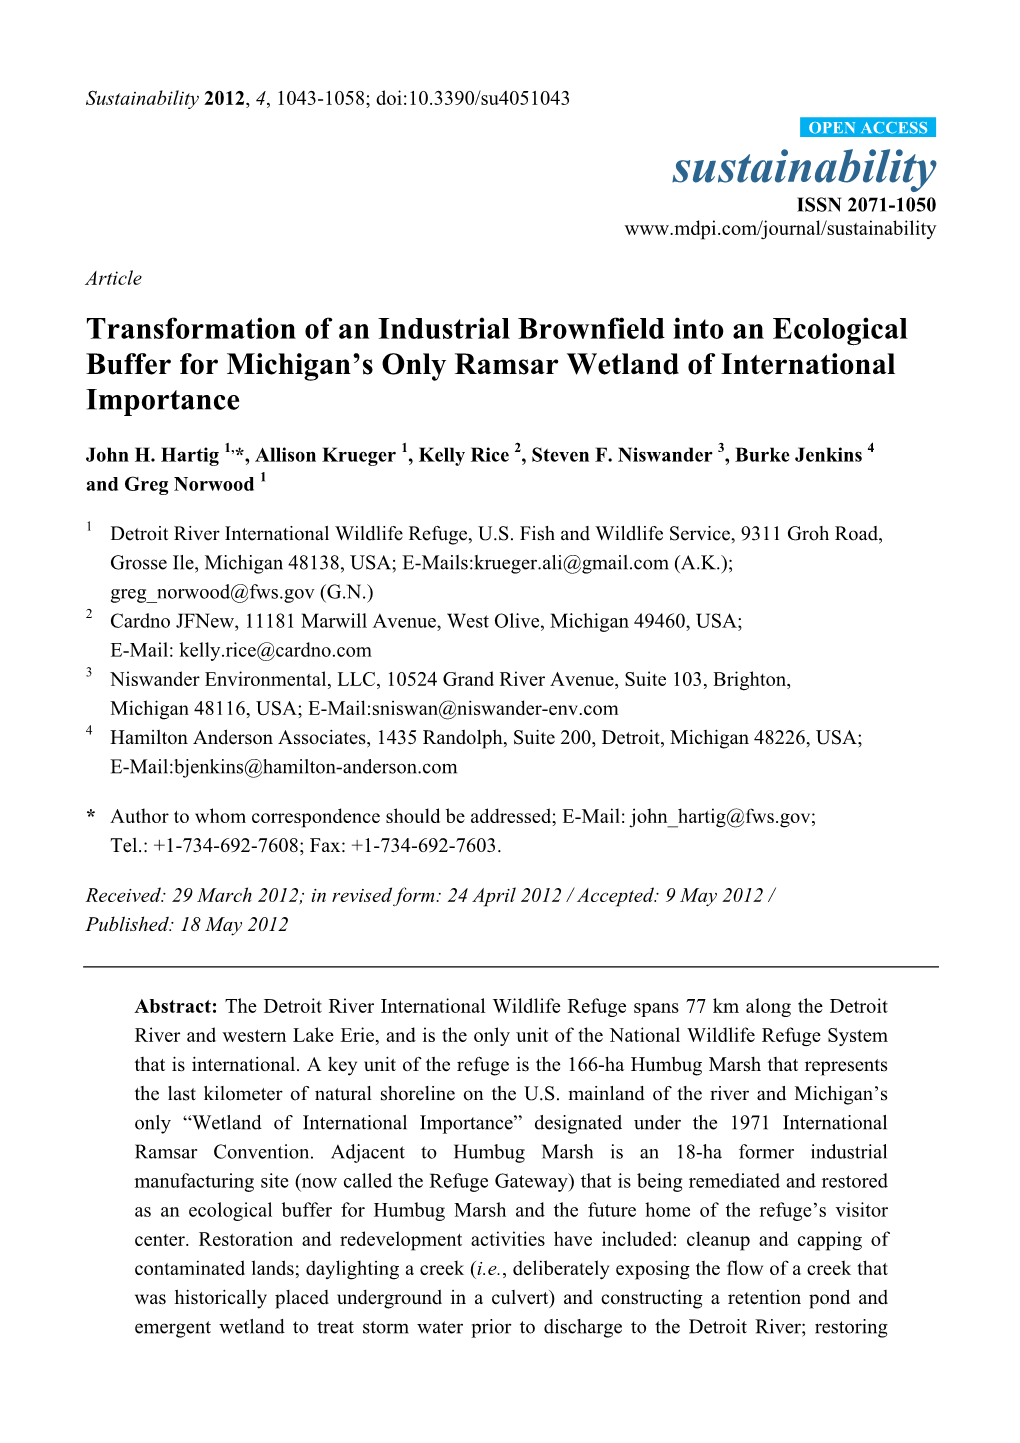 Transformation of an Industrial Brownfield Into an Ecological Buffer for Michigan's Only Ramsar Wetland of International Impor